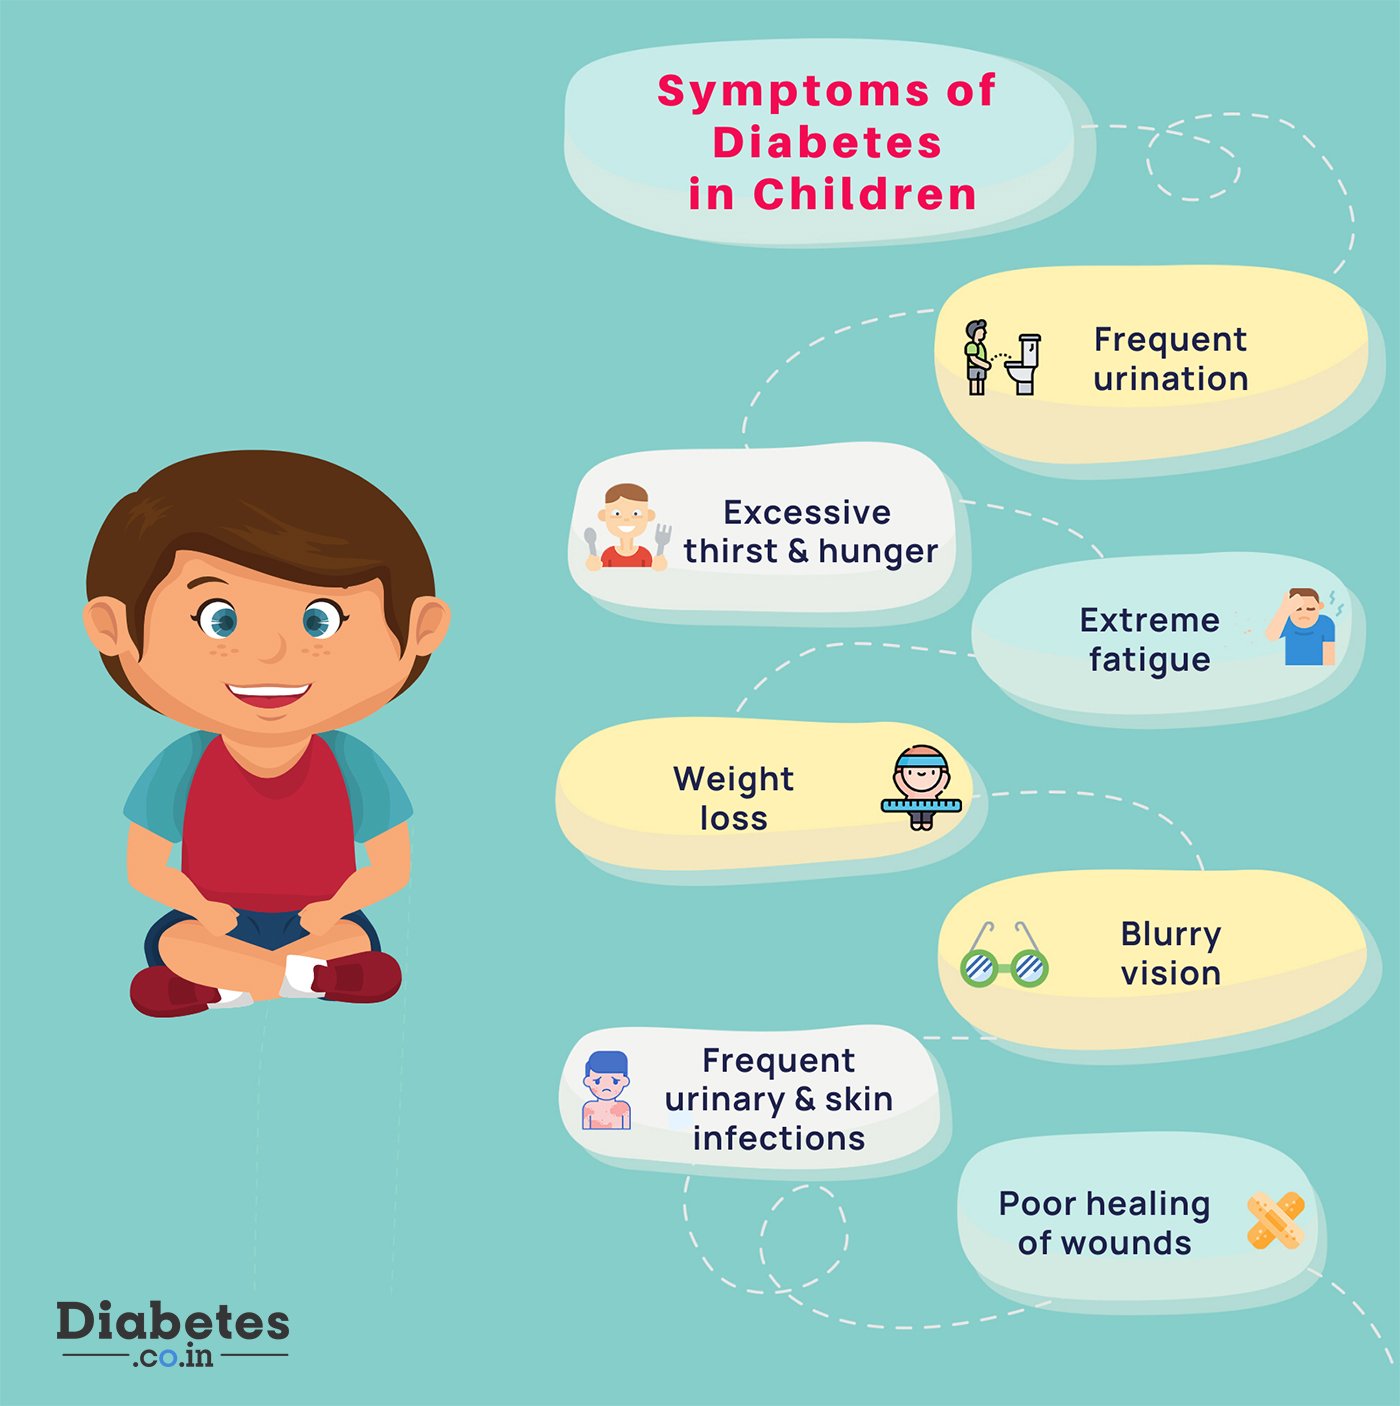 What are the Symptoms of Diabetes in Children?